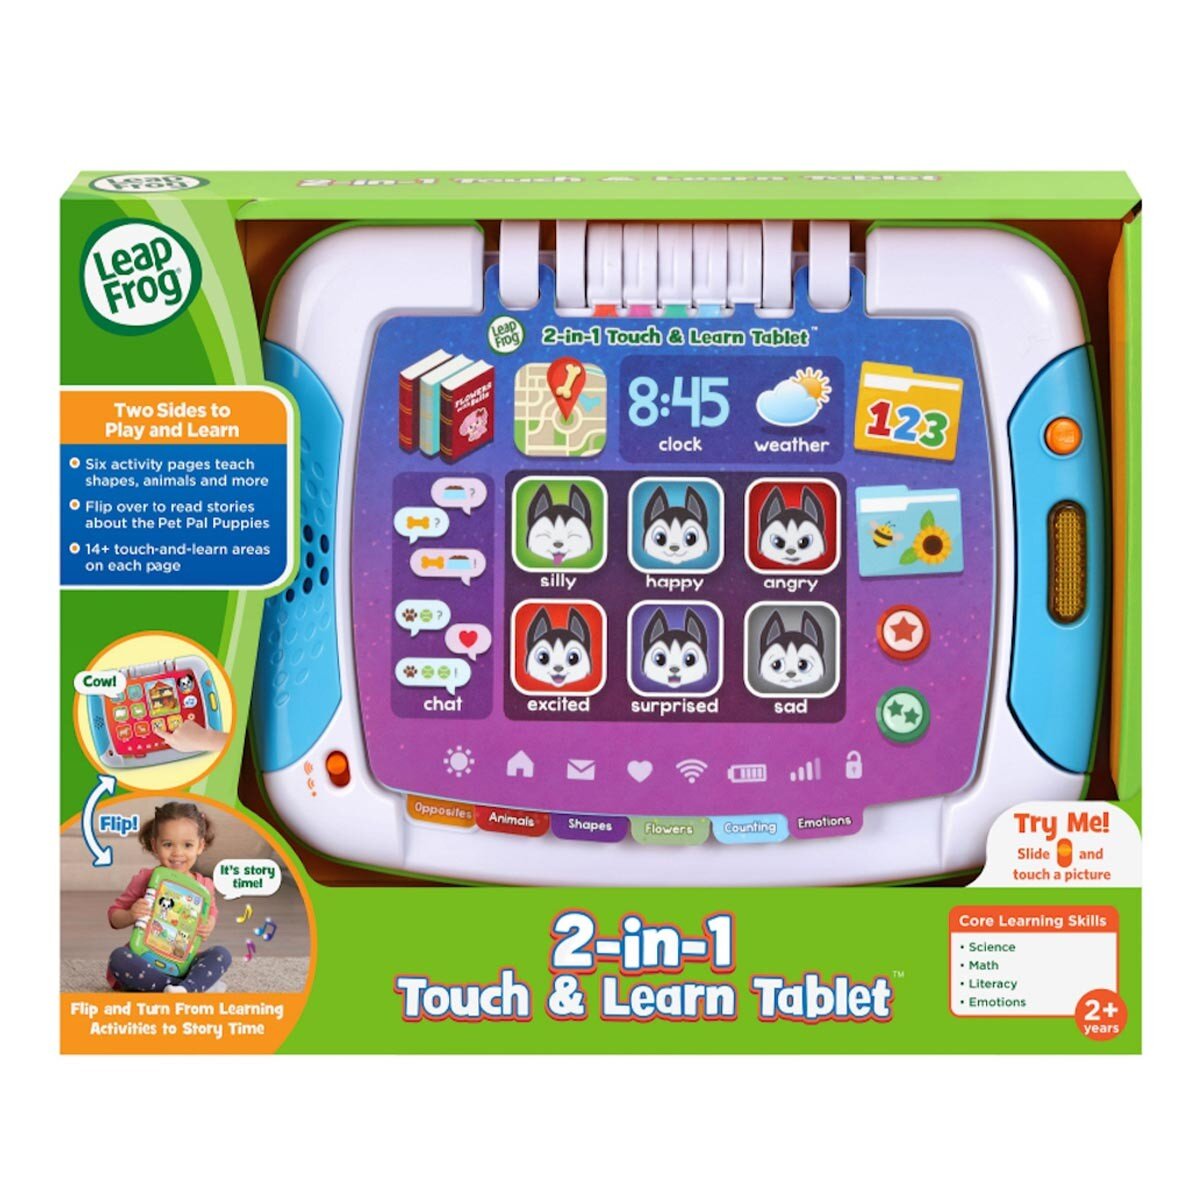 2 IN 1 TOUCH & LEARN TABLET